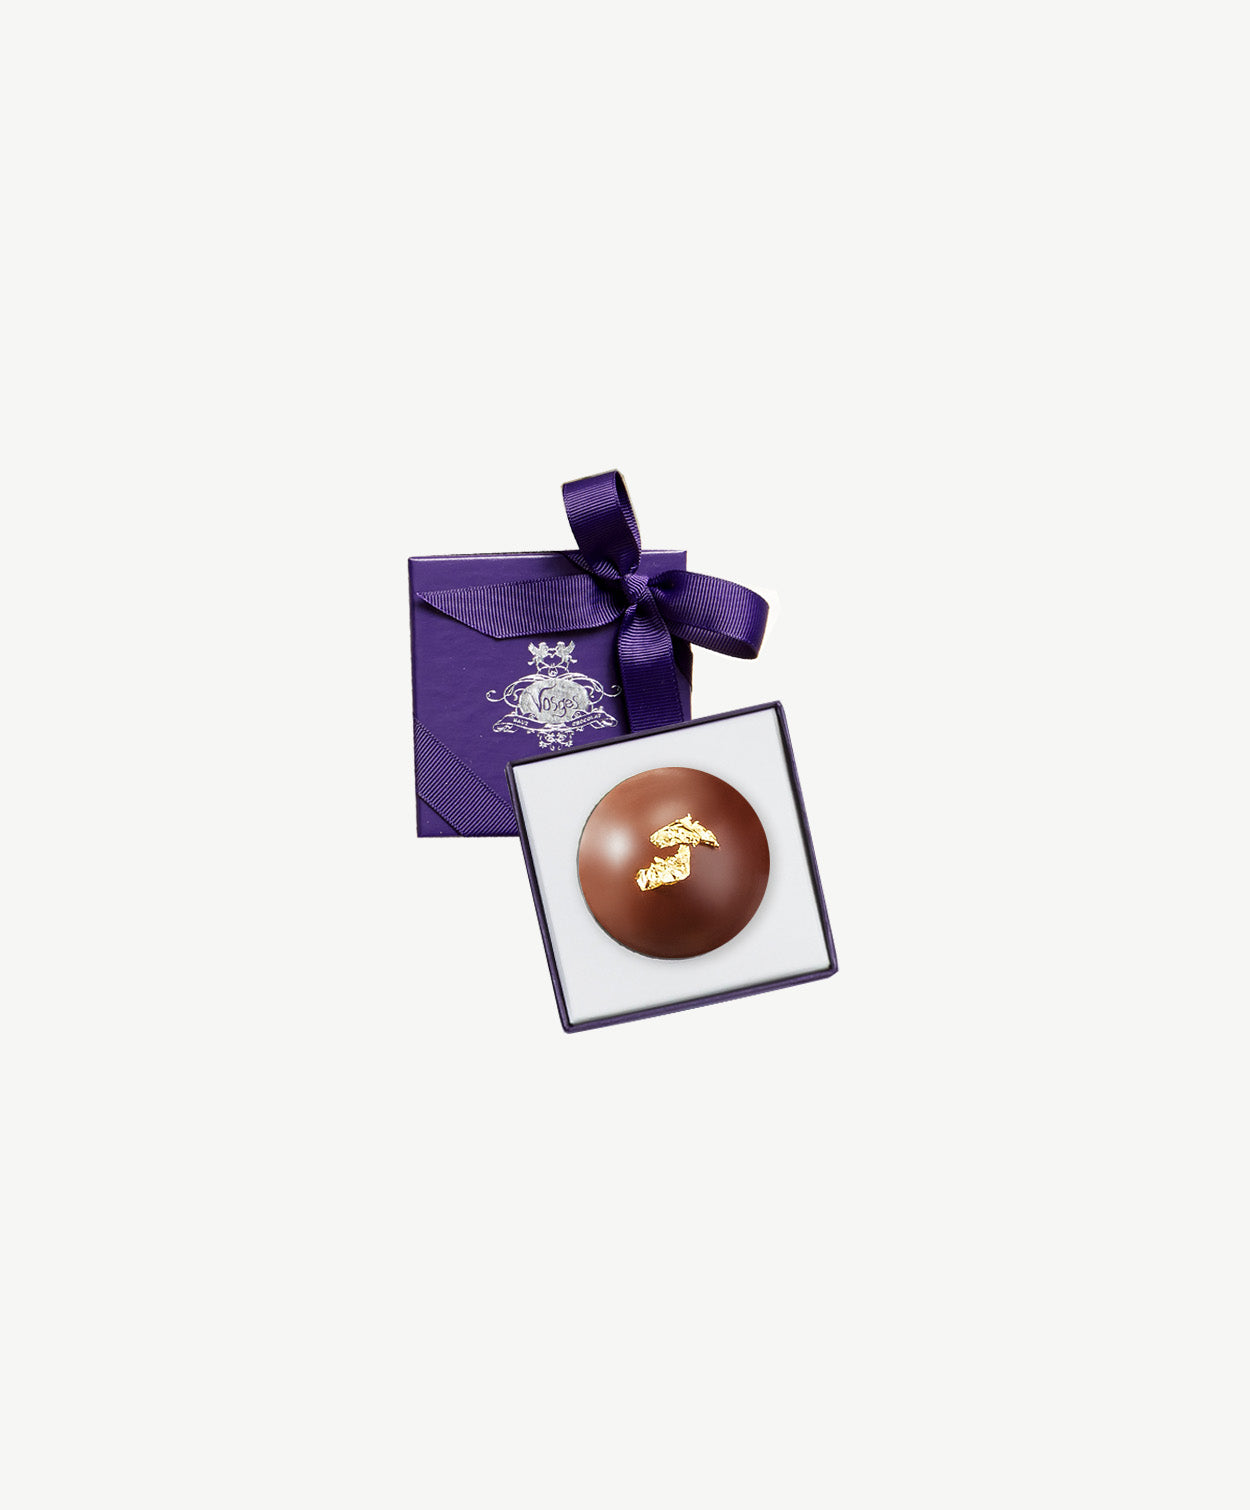 A large hazelnut chocolate bombalina truffle made with a blend of chaga, lion's mane, cordyceps, reishi, maitake, turkey tail mushrooms, sits in a small white and purple candy box tied with a purple ribbon bow on a grey background.